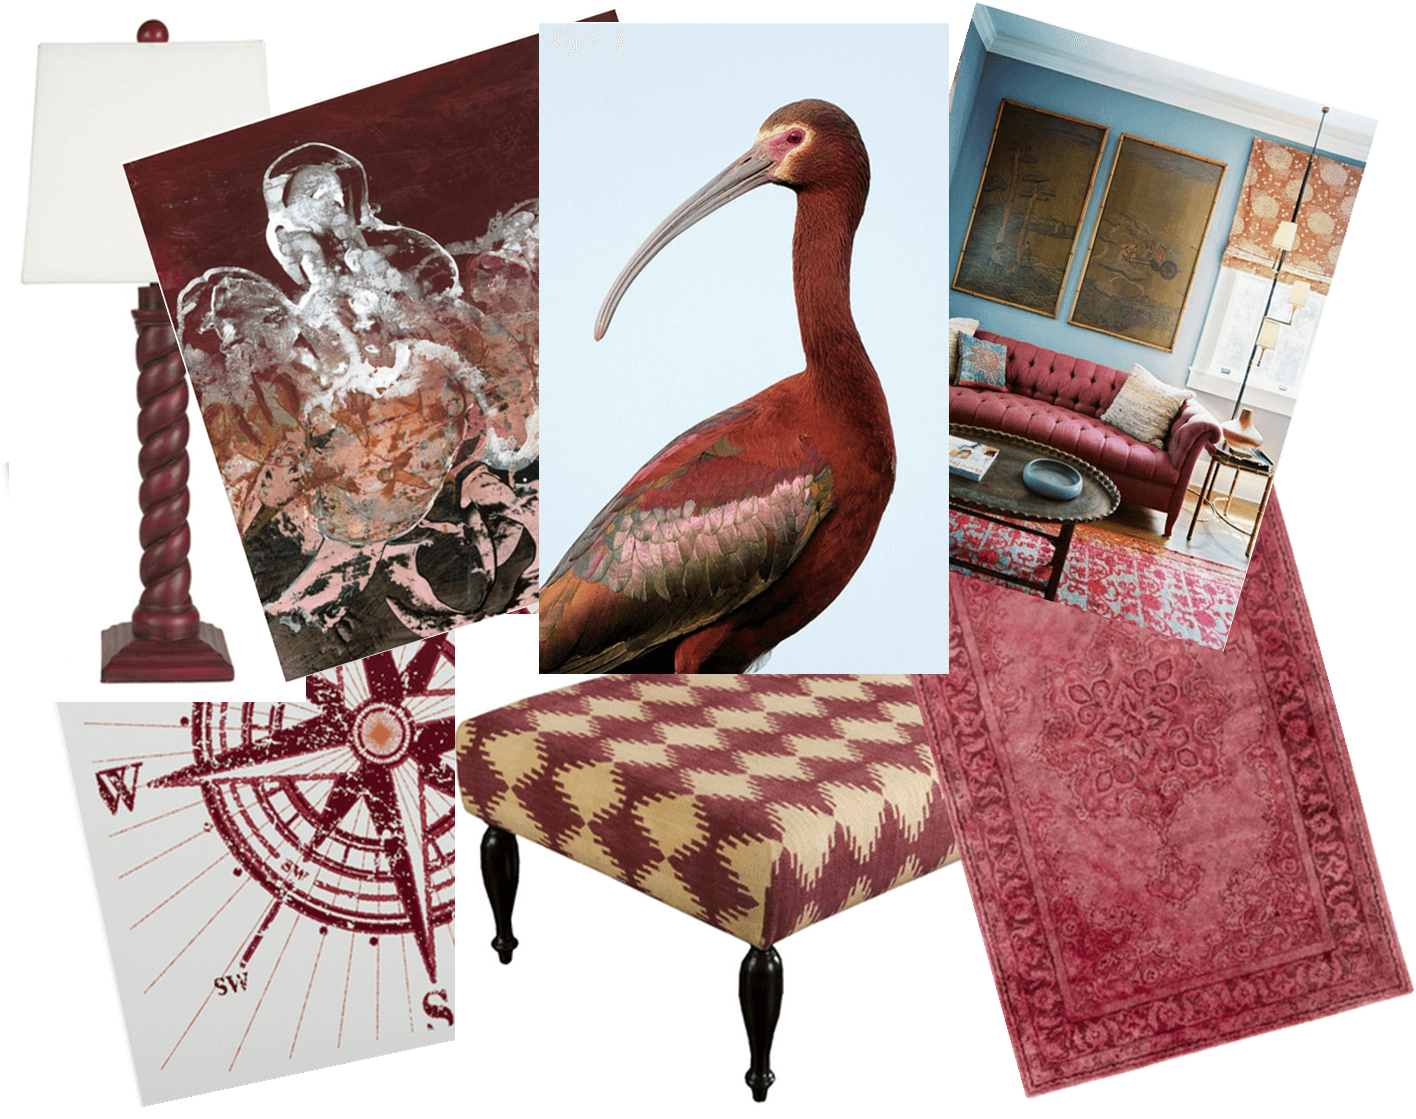 Pantone’s Color of the Year – Marsala